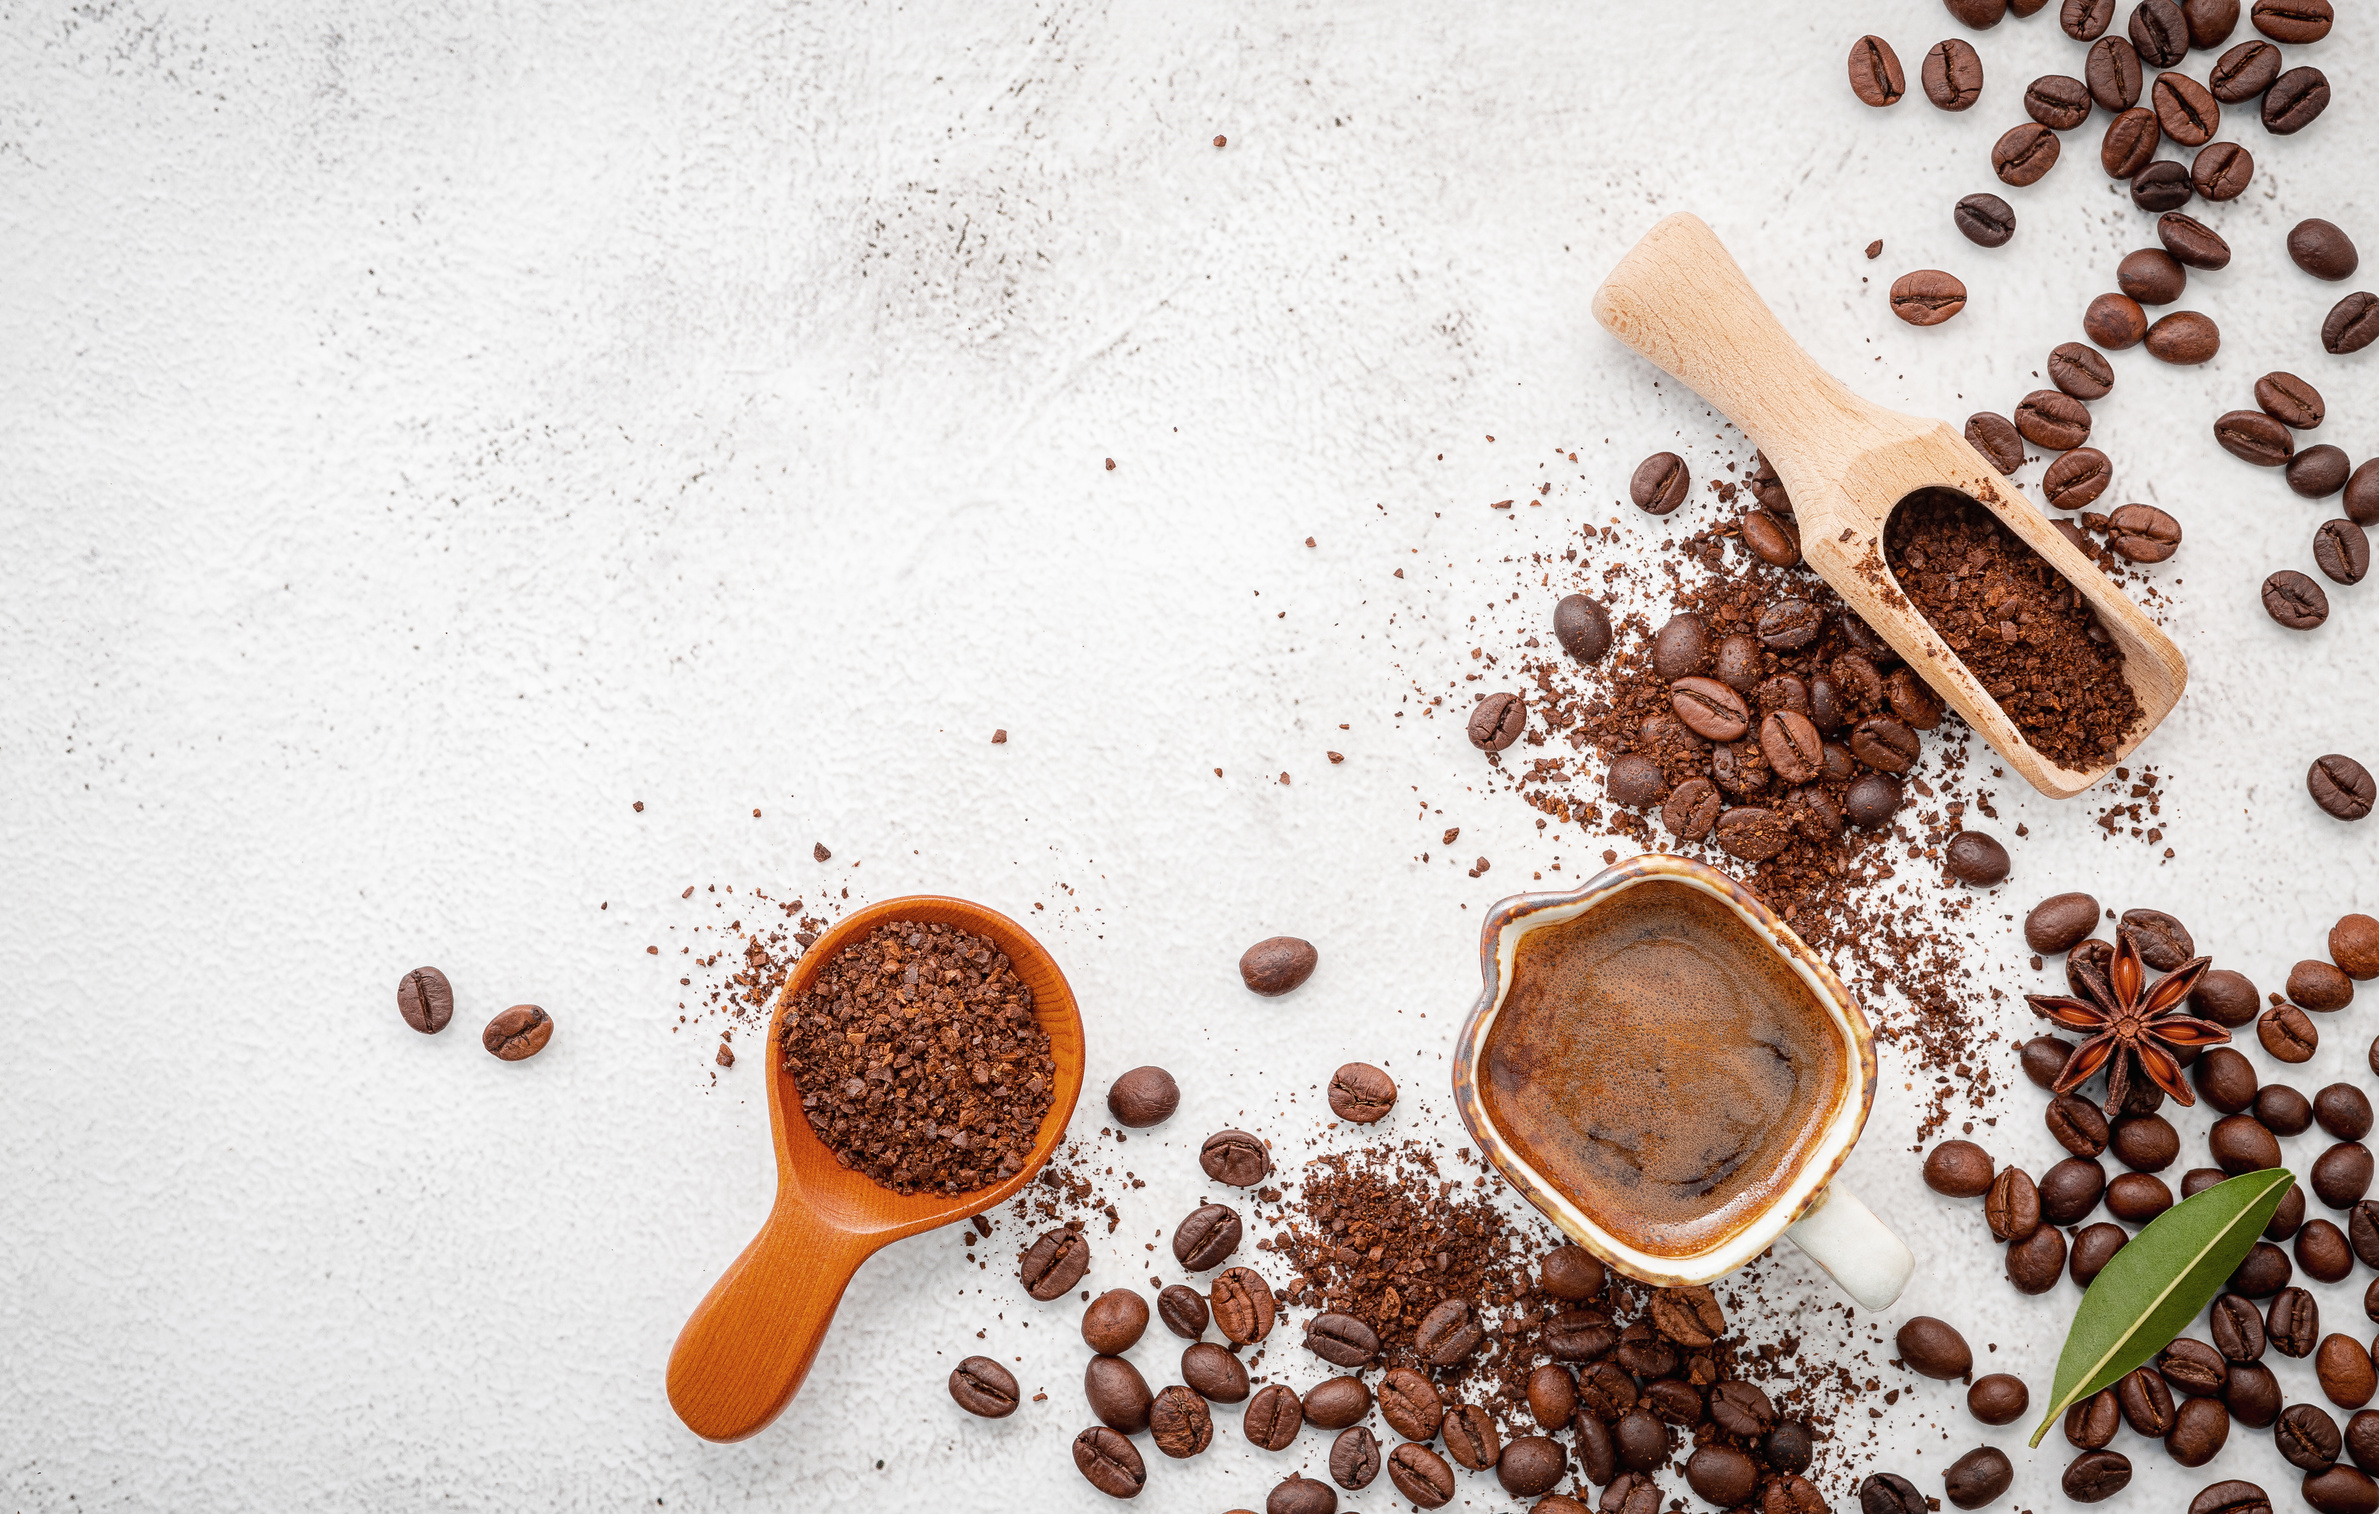 Background of Various Coffee Powder and Coffee Beans